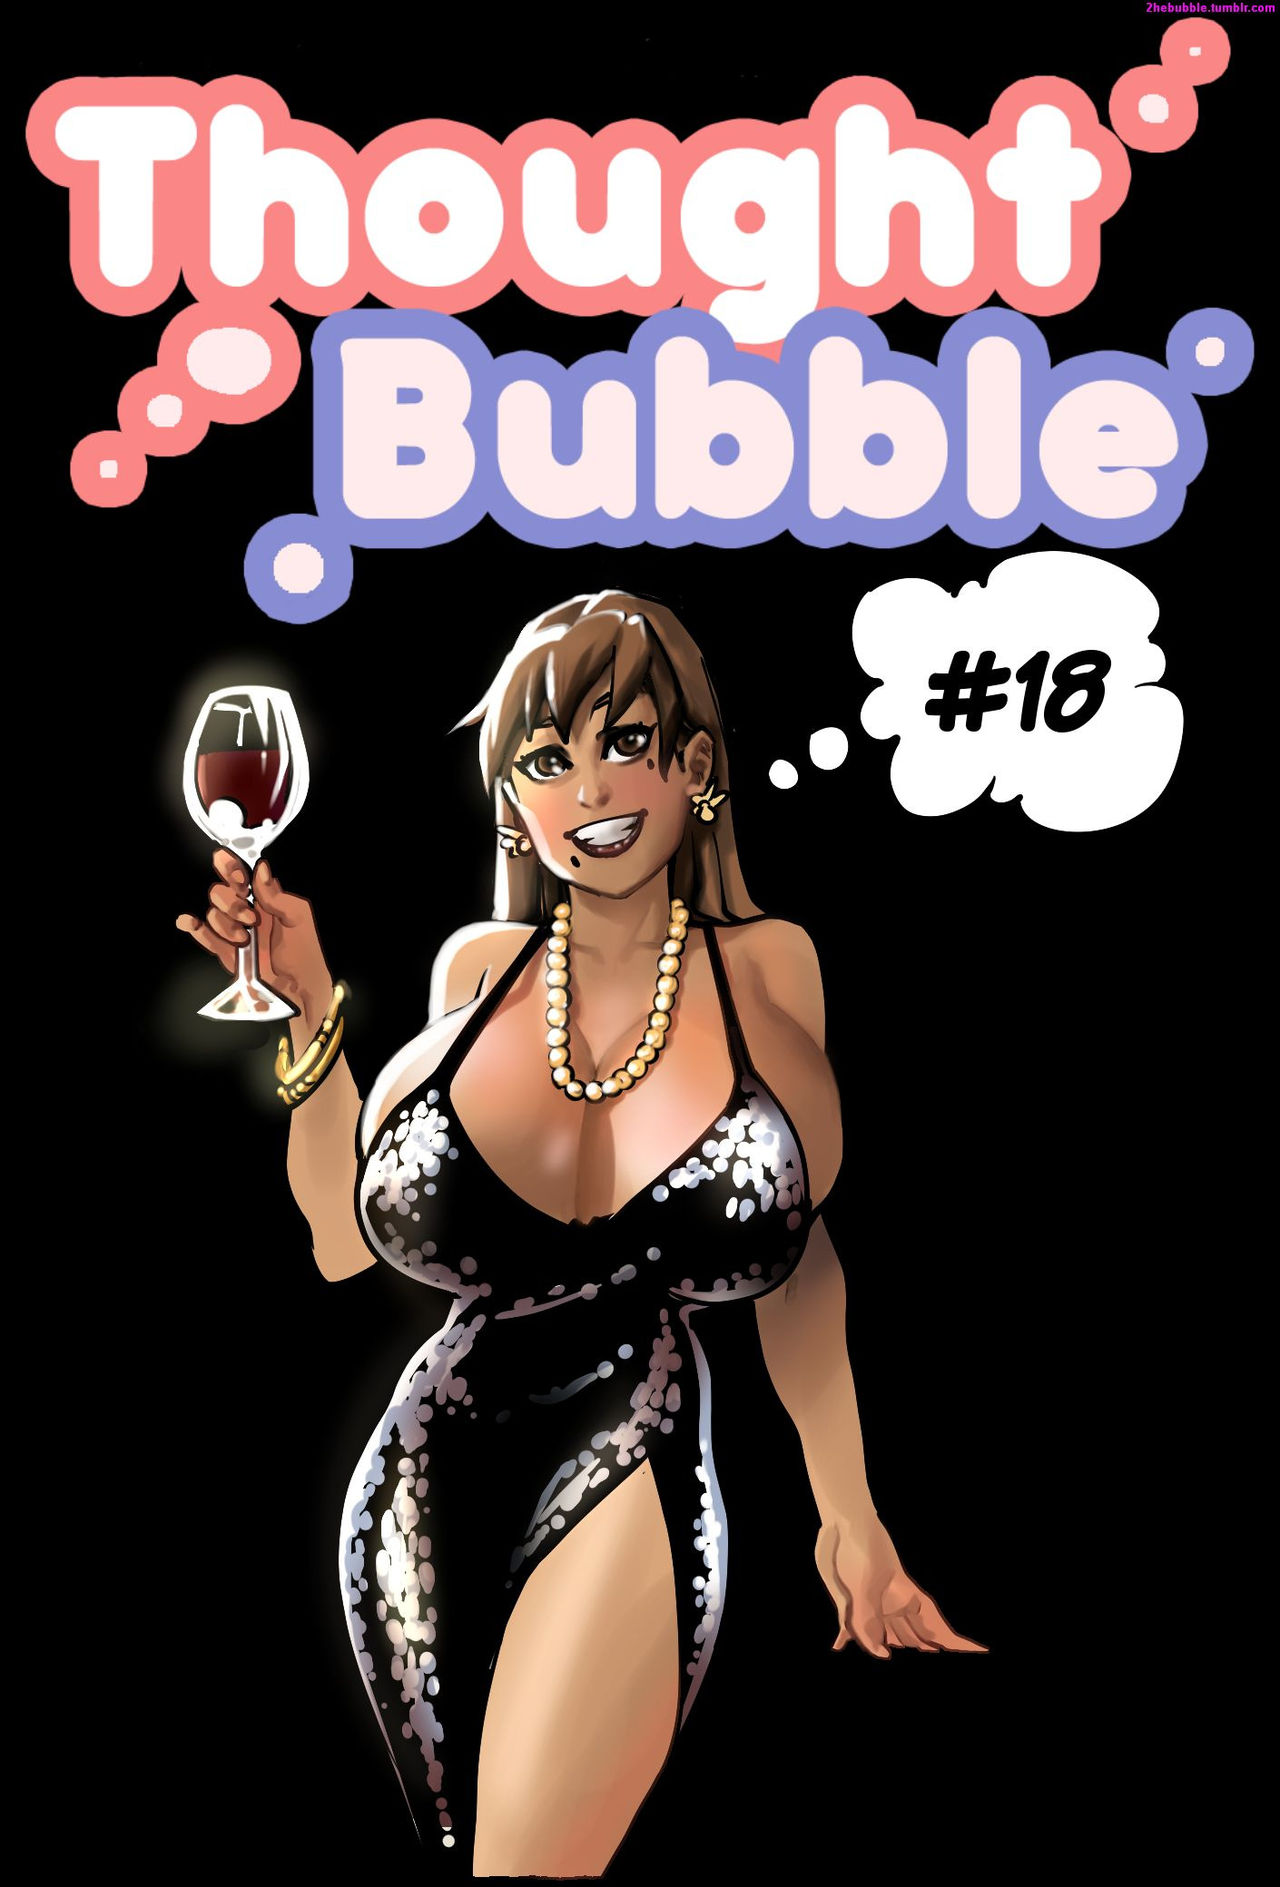 Thought Porn - Sidneymt] - Thought Bubble #18 | Porn Comics